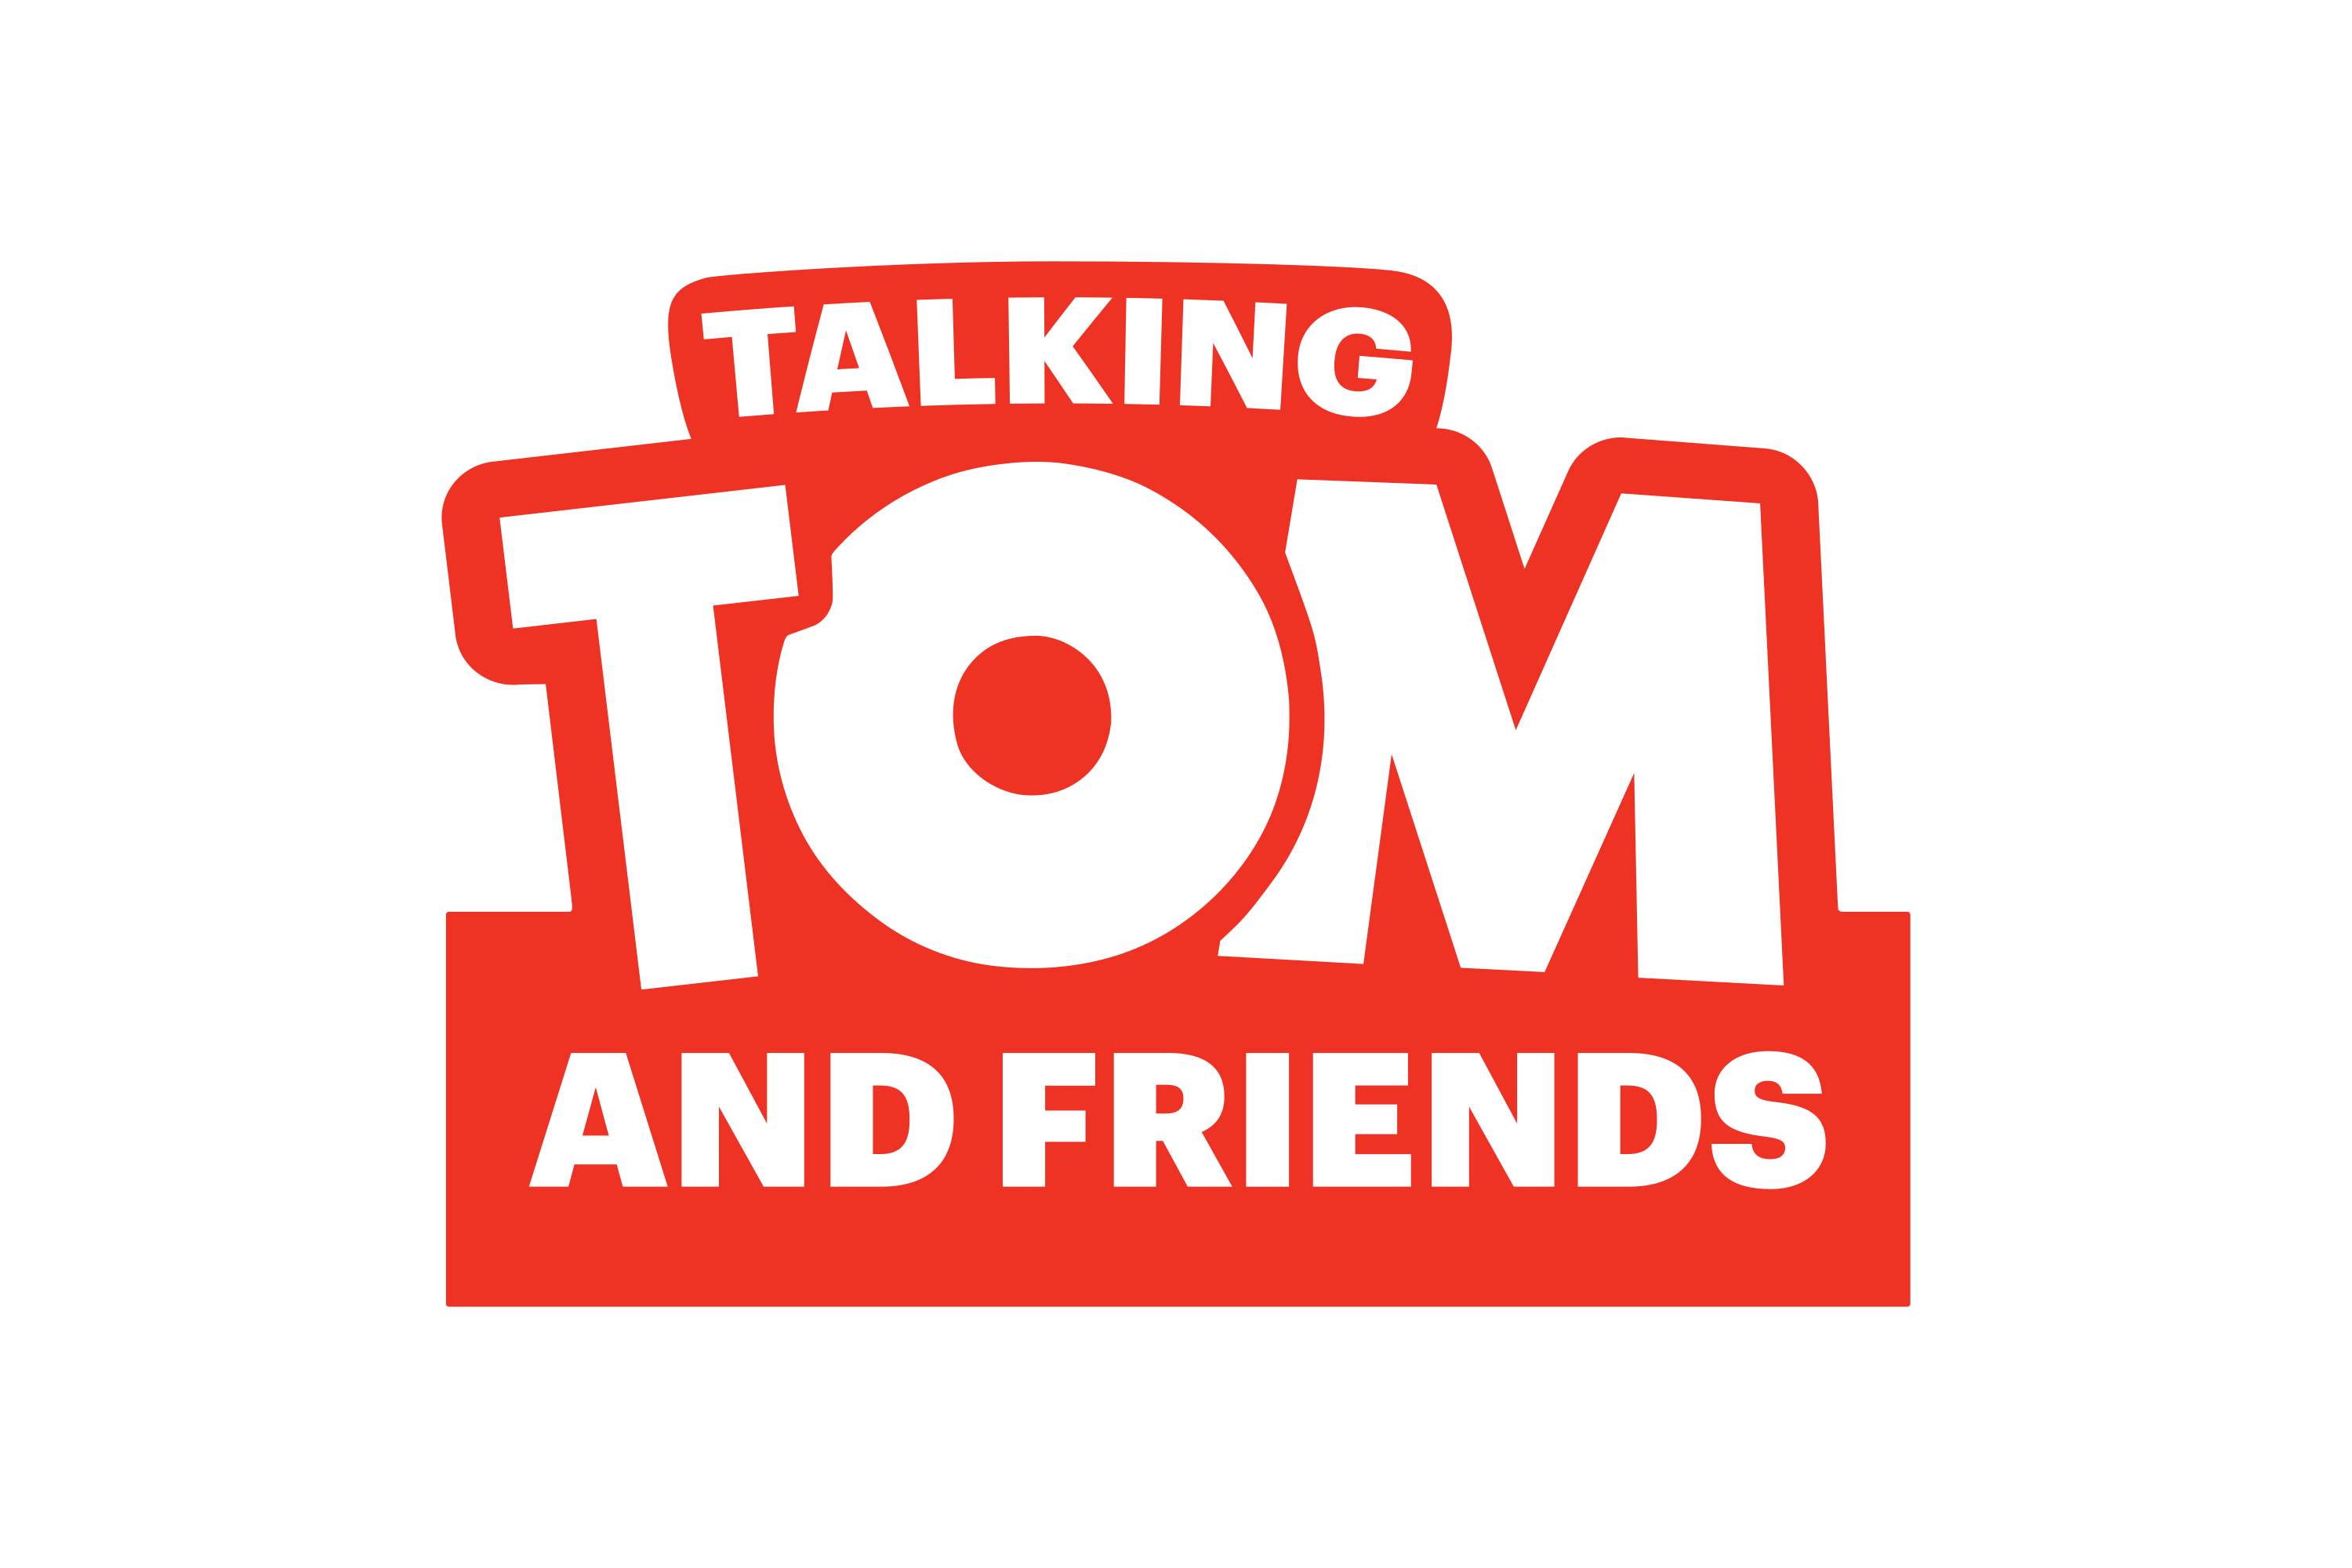 Download Talking Tom and Friends Logo in SVG Vector or PNG File Format